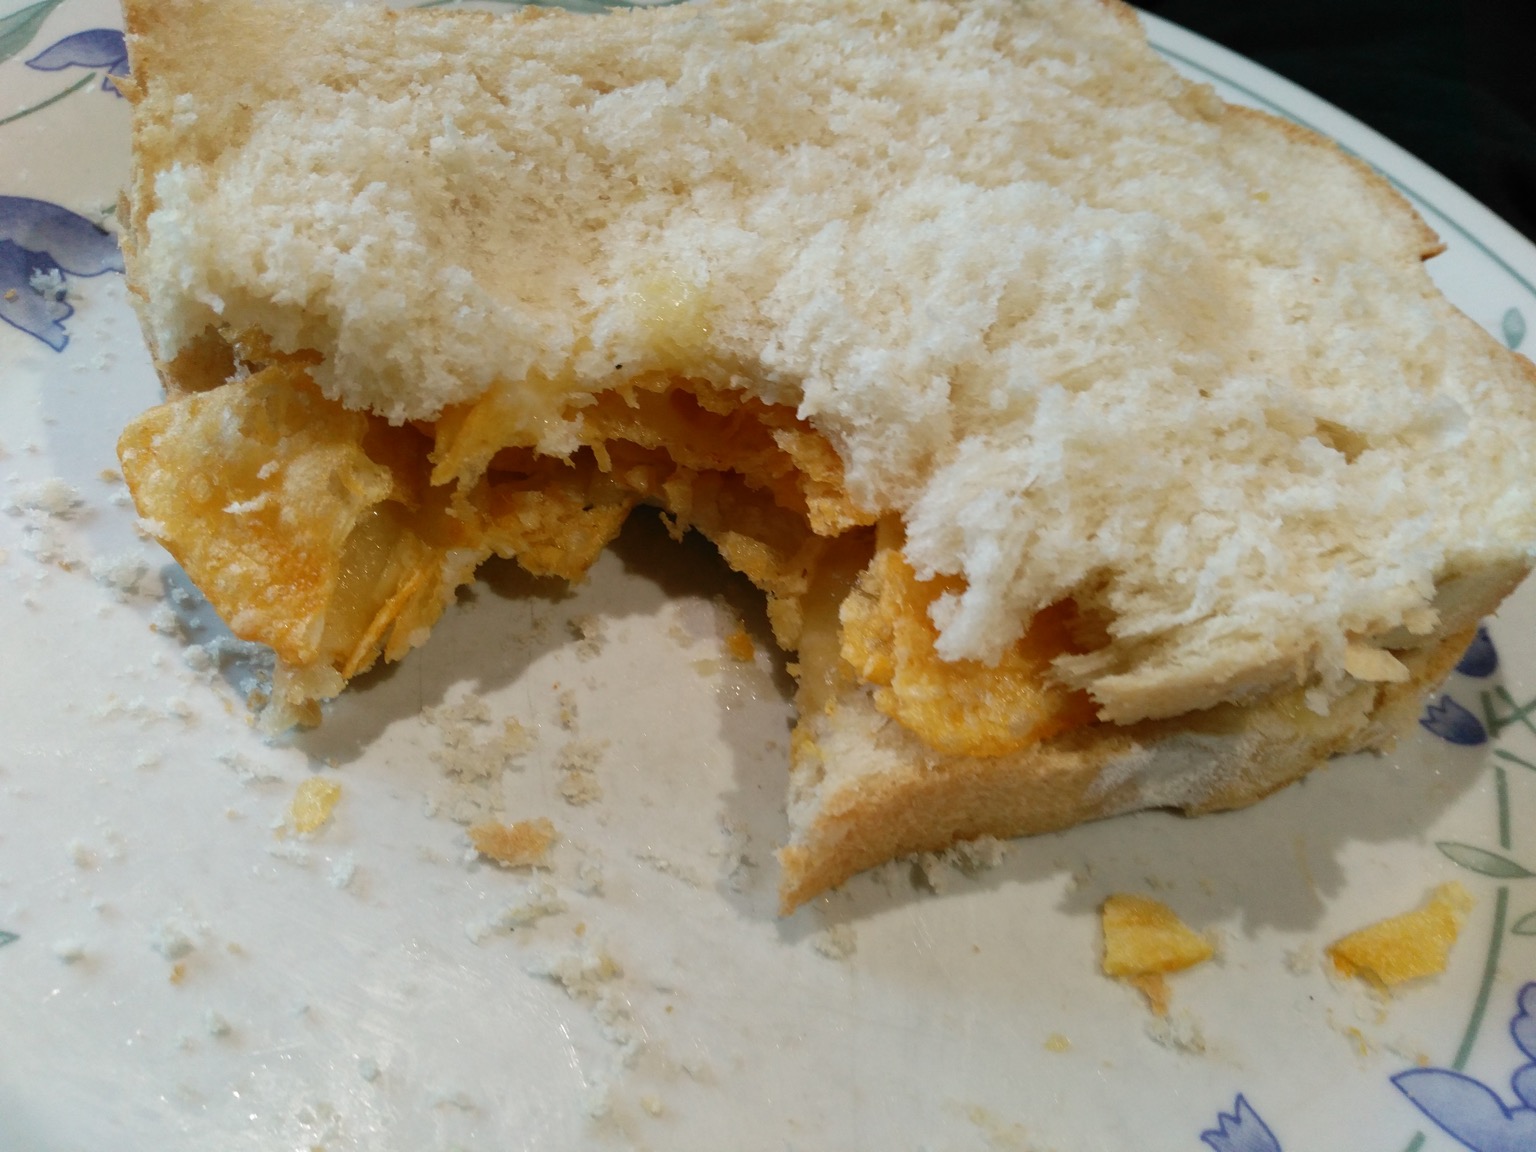 Close-up of crisp sandwich with a bite out of it